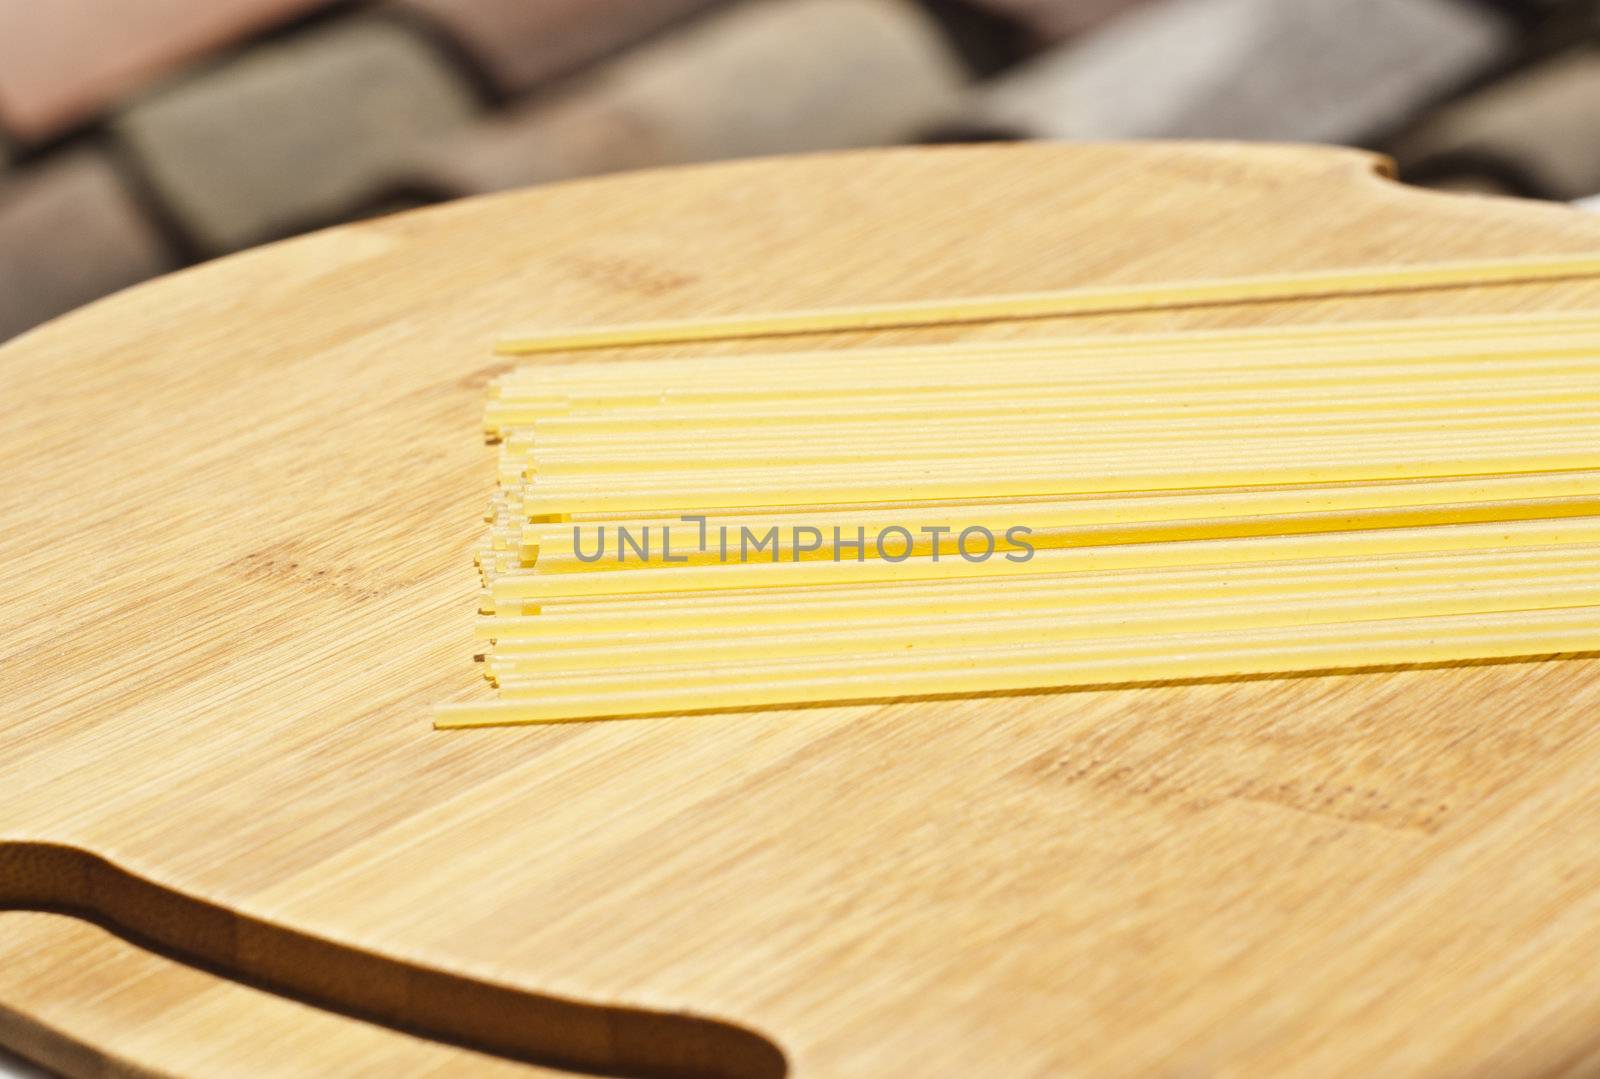 spaghetti pasta on wooden board with roof in the background.